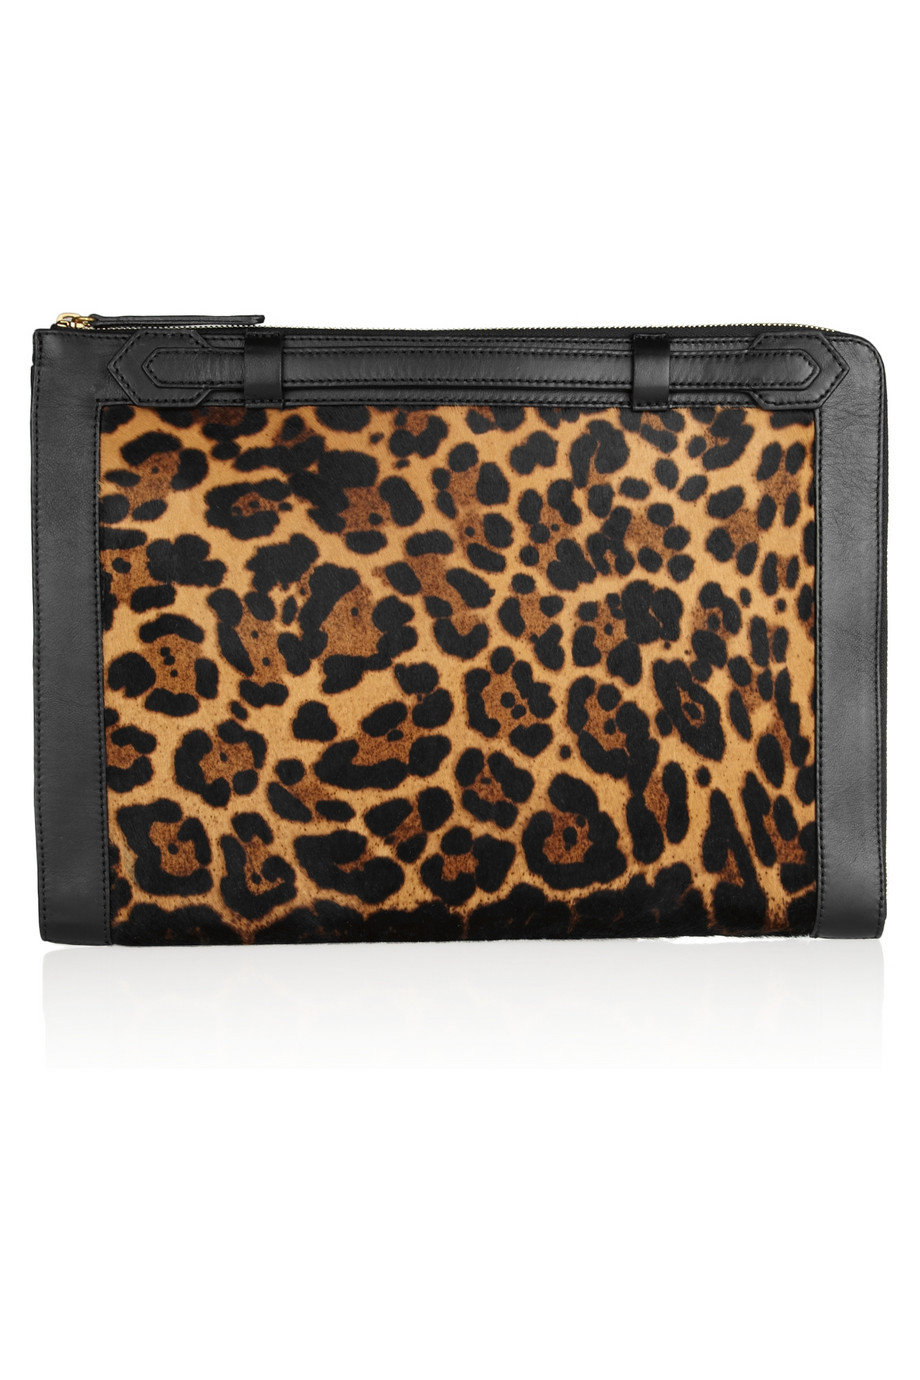 Lyst - Christian louboutin Leather-Trimmed Leopard-Print Calf Hair ...